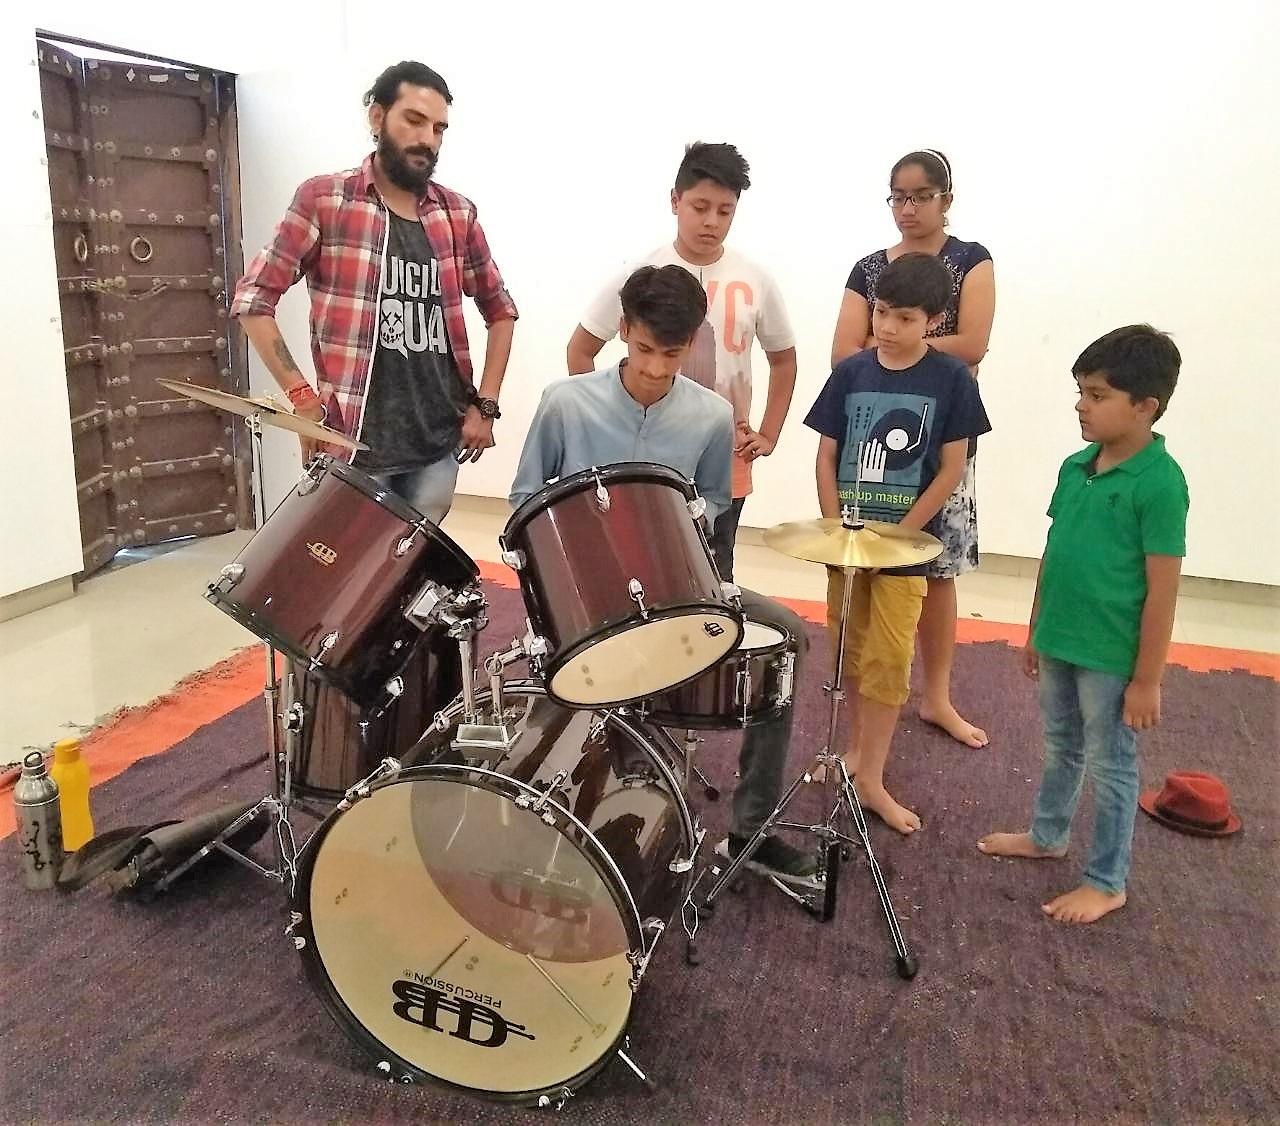 CHILDREN LEARN PERCUSSION INSTRUMENTS AT JUNIOR SUMMER